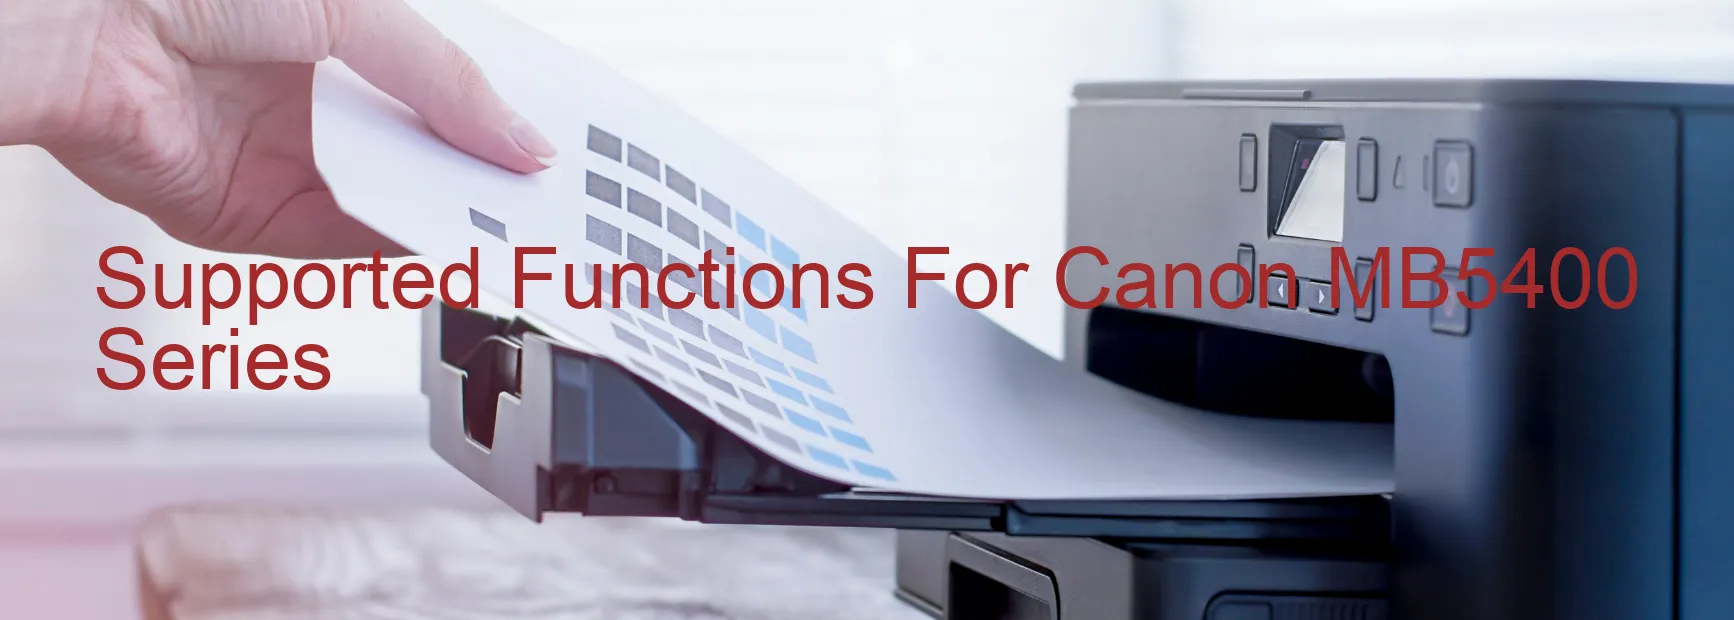 supported-functions-for-canon-mb5400-series.webp